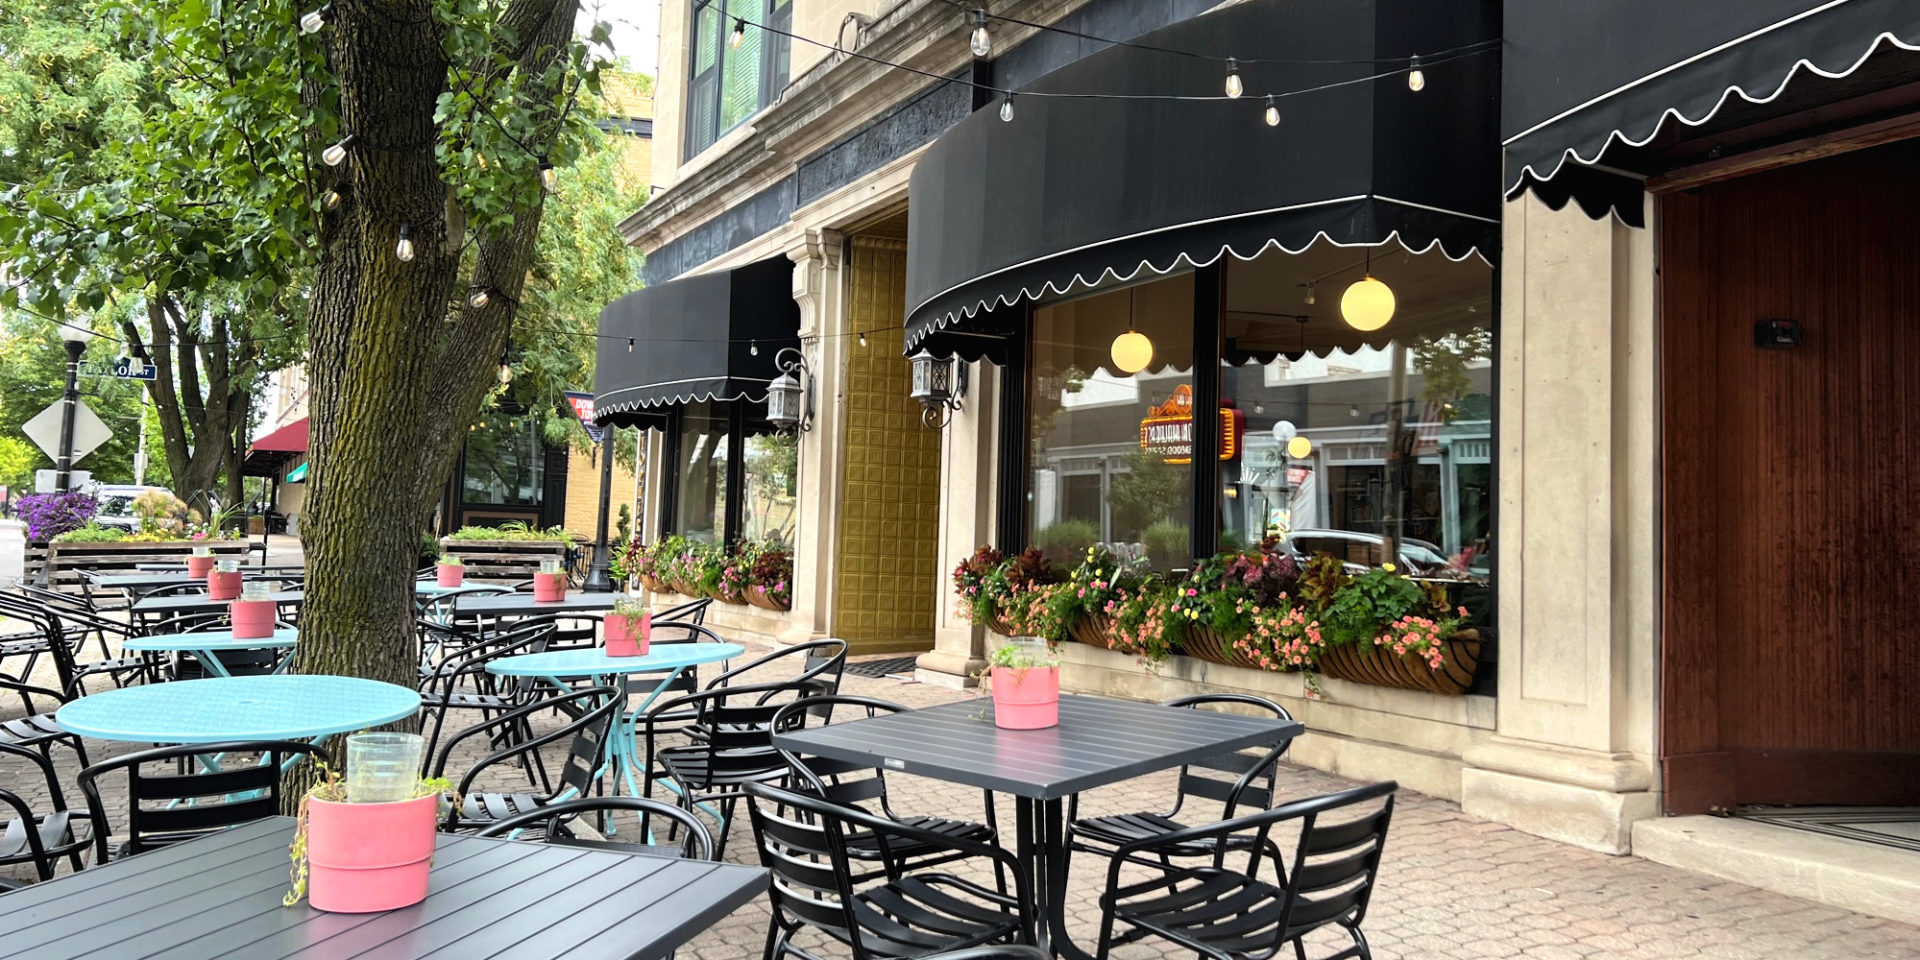 The Literary Cafe in Downtown Champaign has a black awning and tables outside on the sidewalk. Photo by Alyssa Buckley.